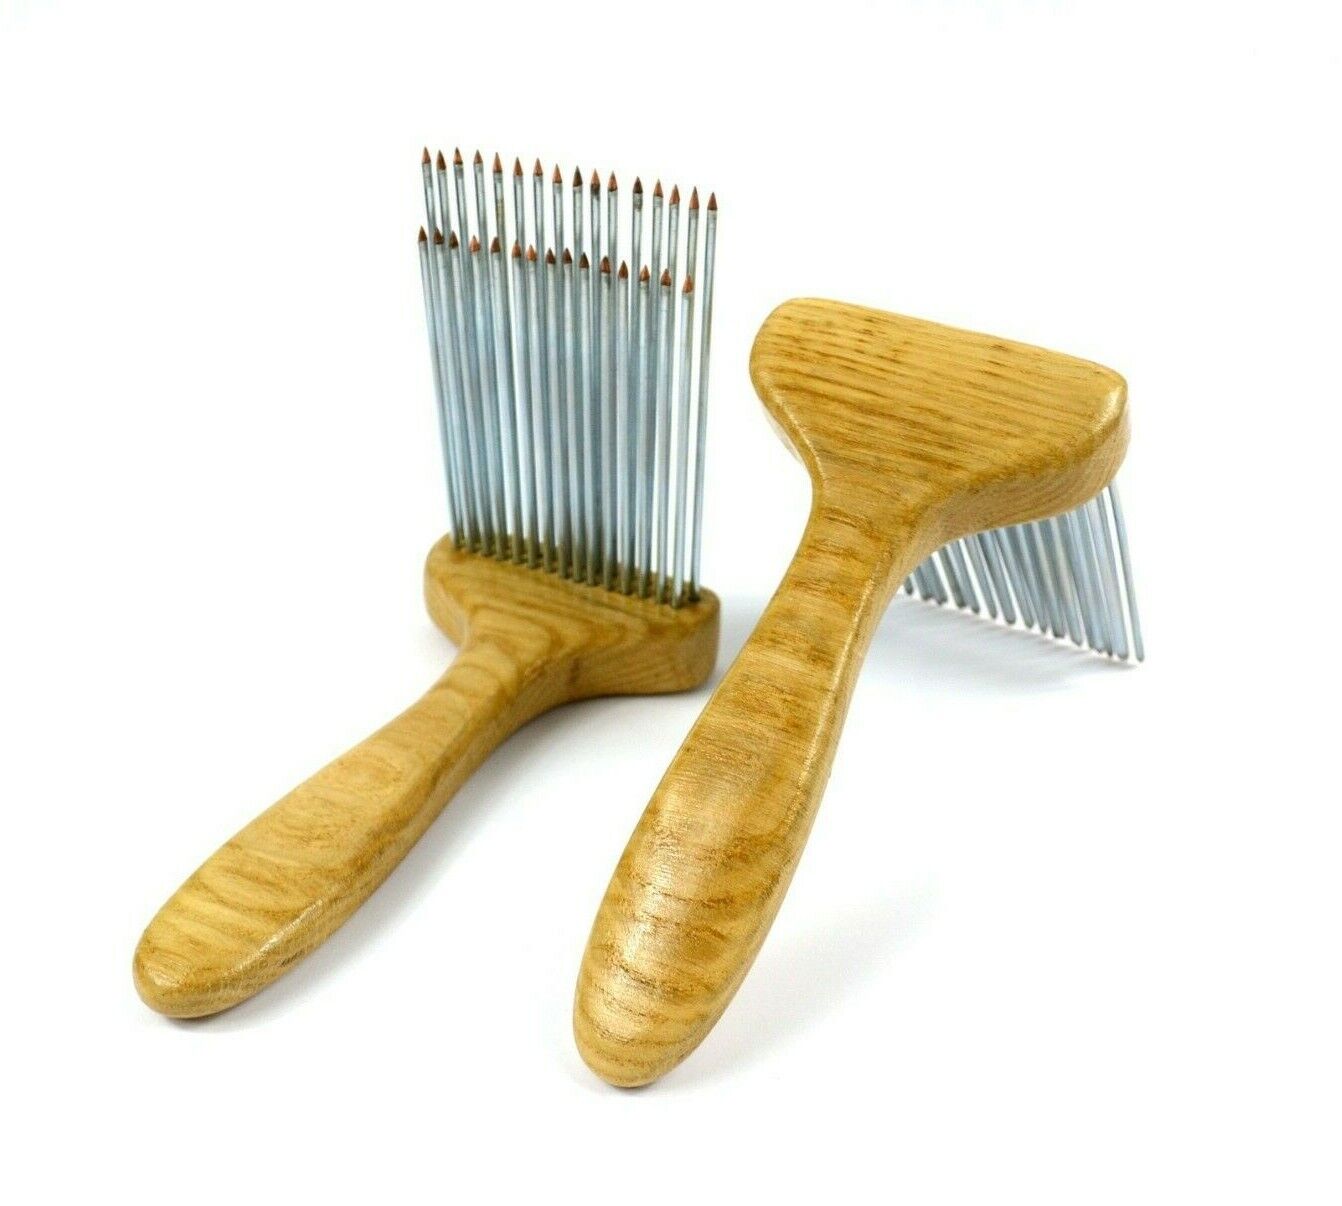 Hand Carders For Wool With 2 Rows. 2 Viking Wool Combs For Fine And Medium Wool